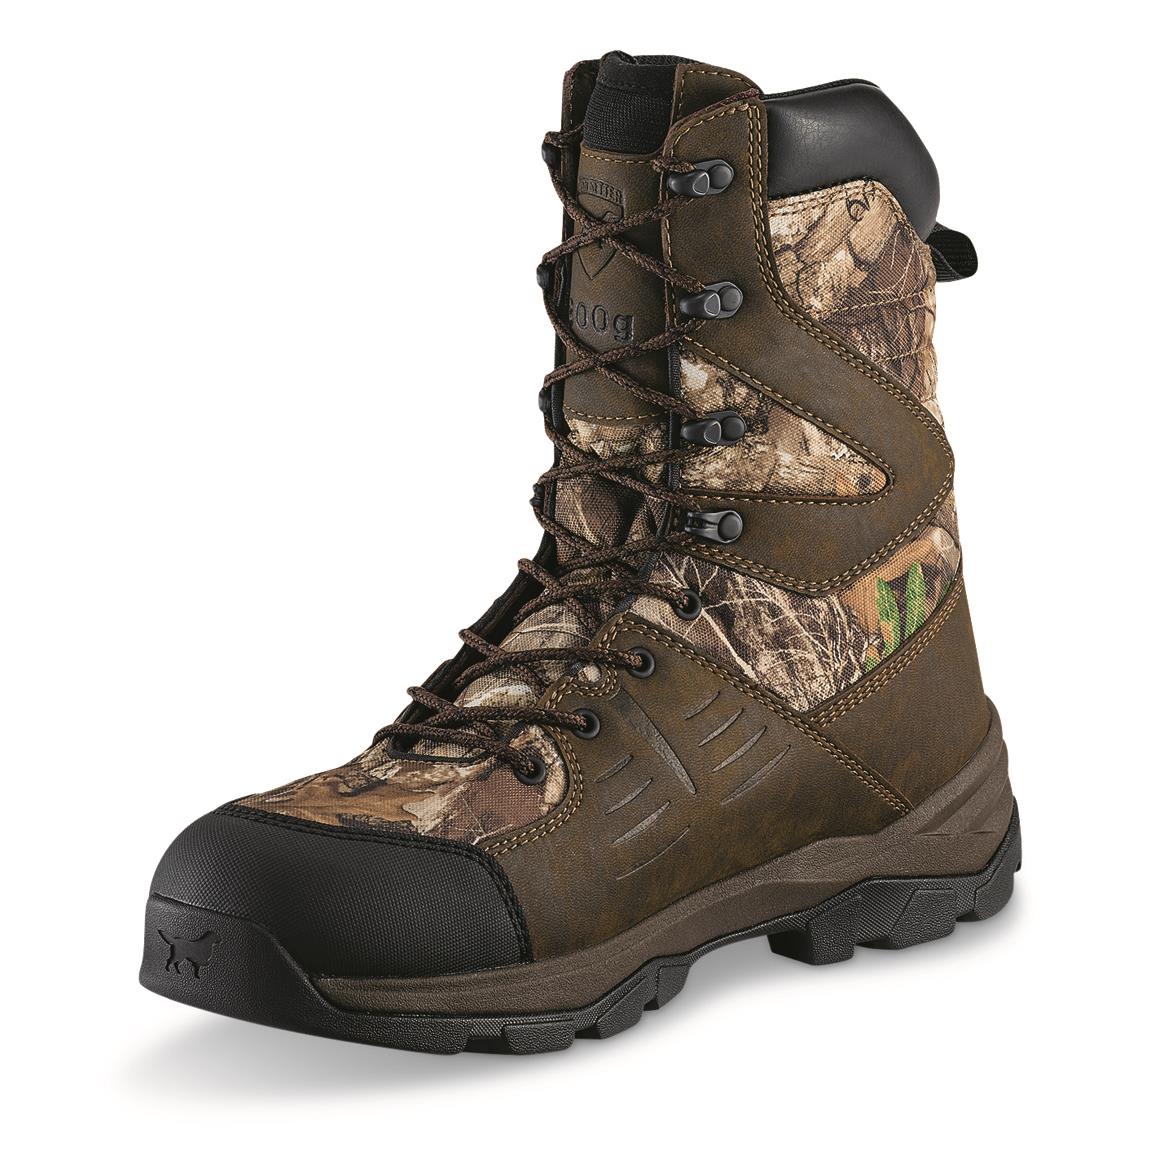 Rocky Sport Utility Max Insulated Waterproof Hunting Boots, 1,000-gram ...